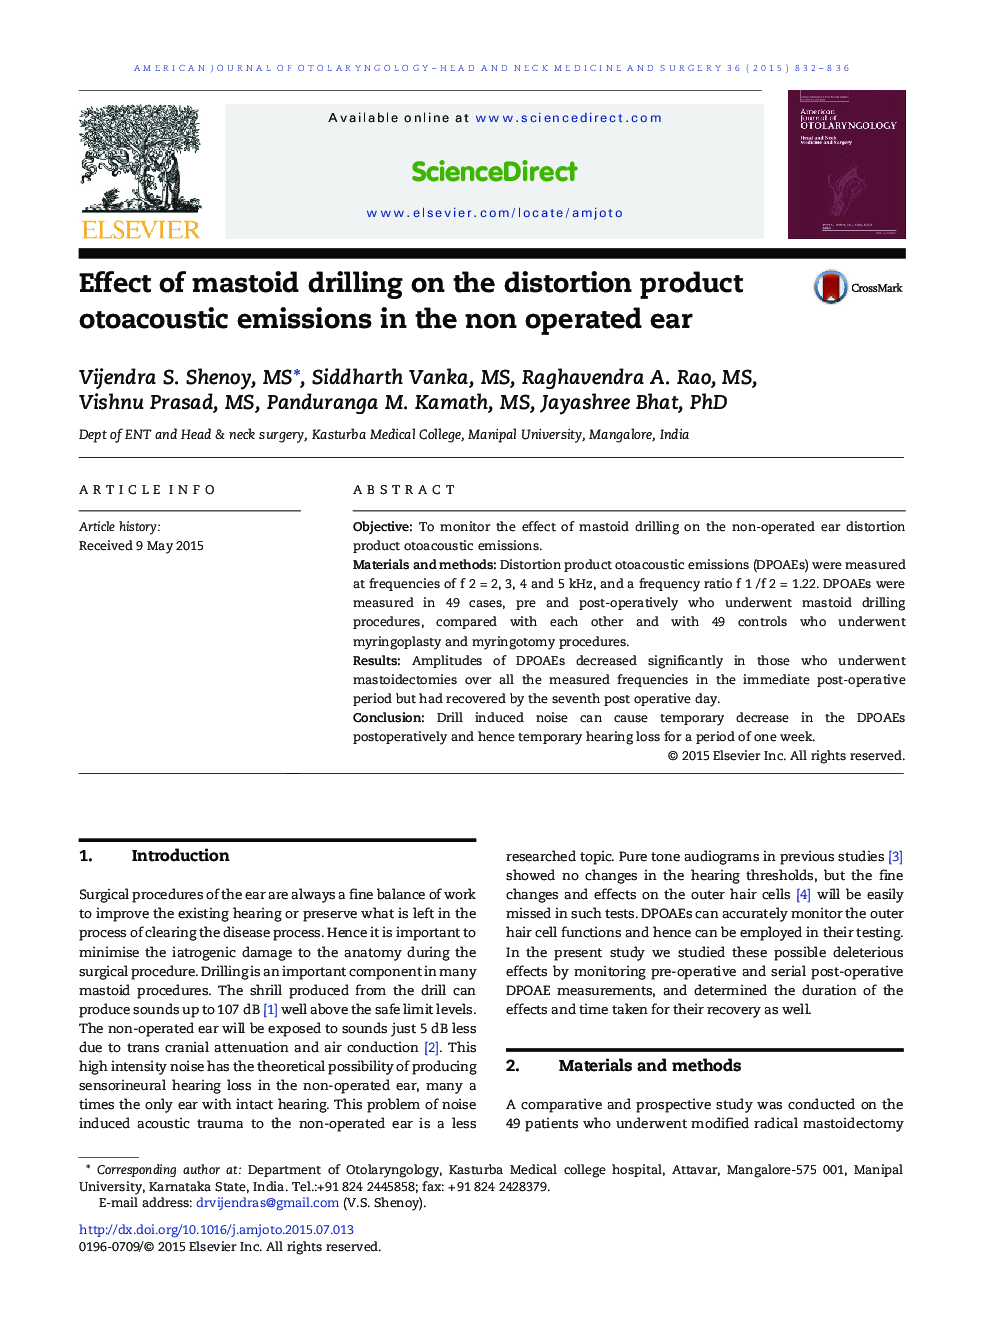 Effect of mastoid drilling on the distortion product otoacoustic emissions in the non operated ear